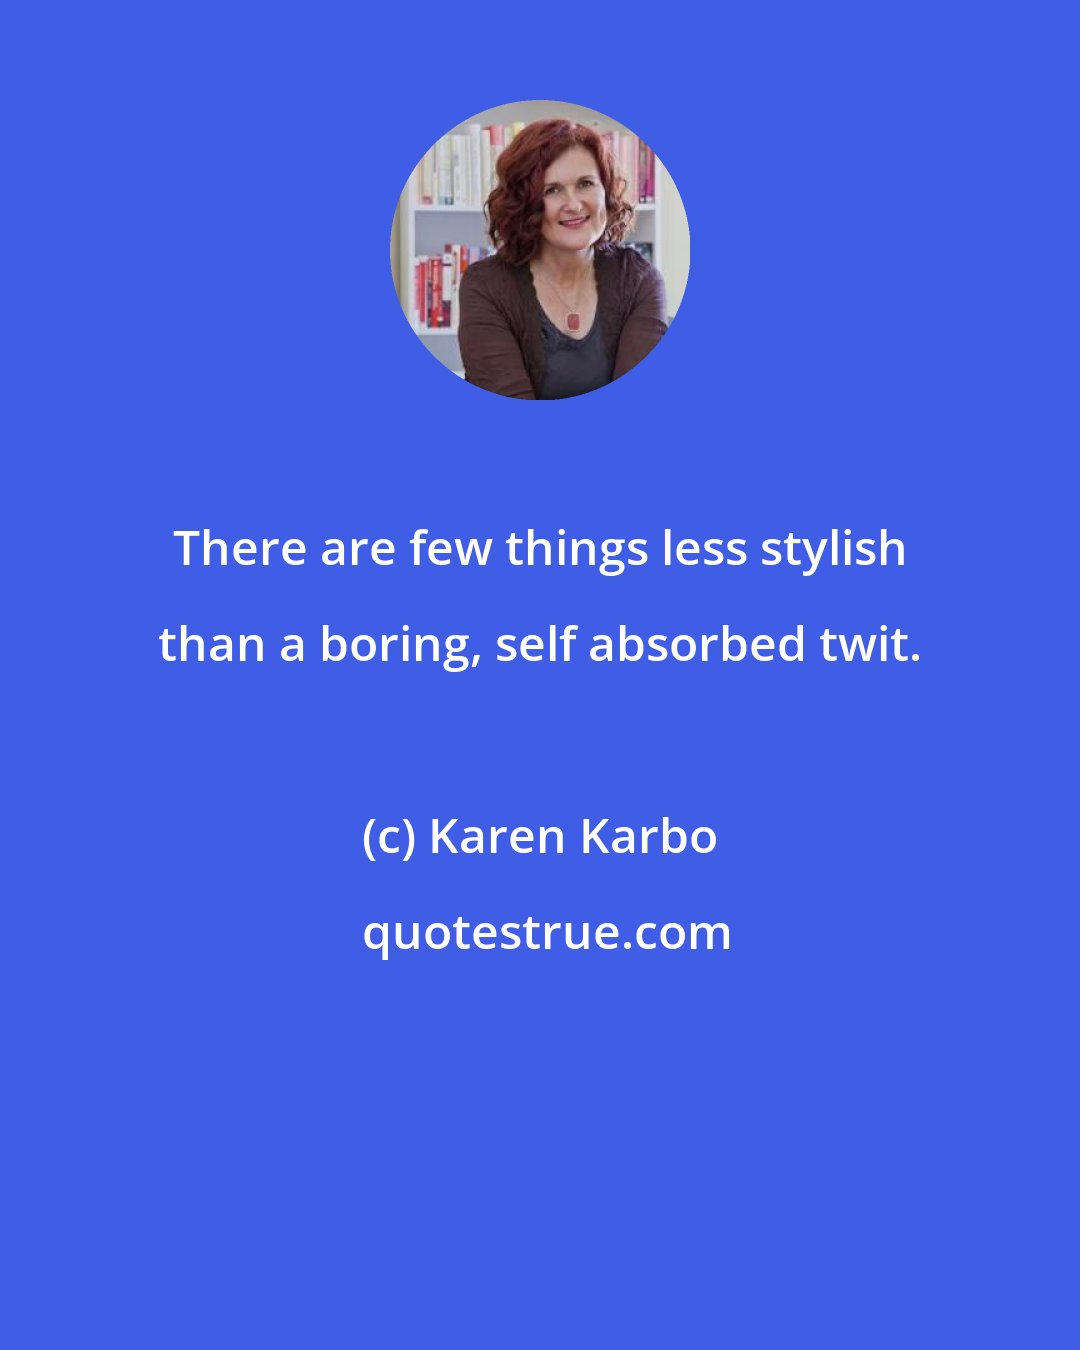 Karen Karbo: There are few things less stylish than a boring, self absorbed twit.